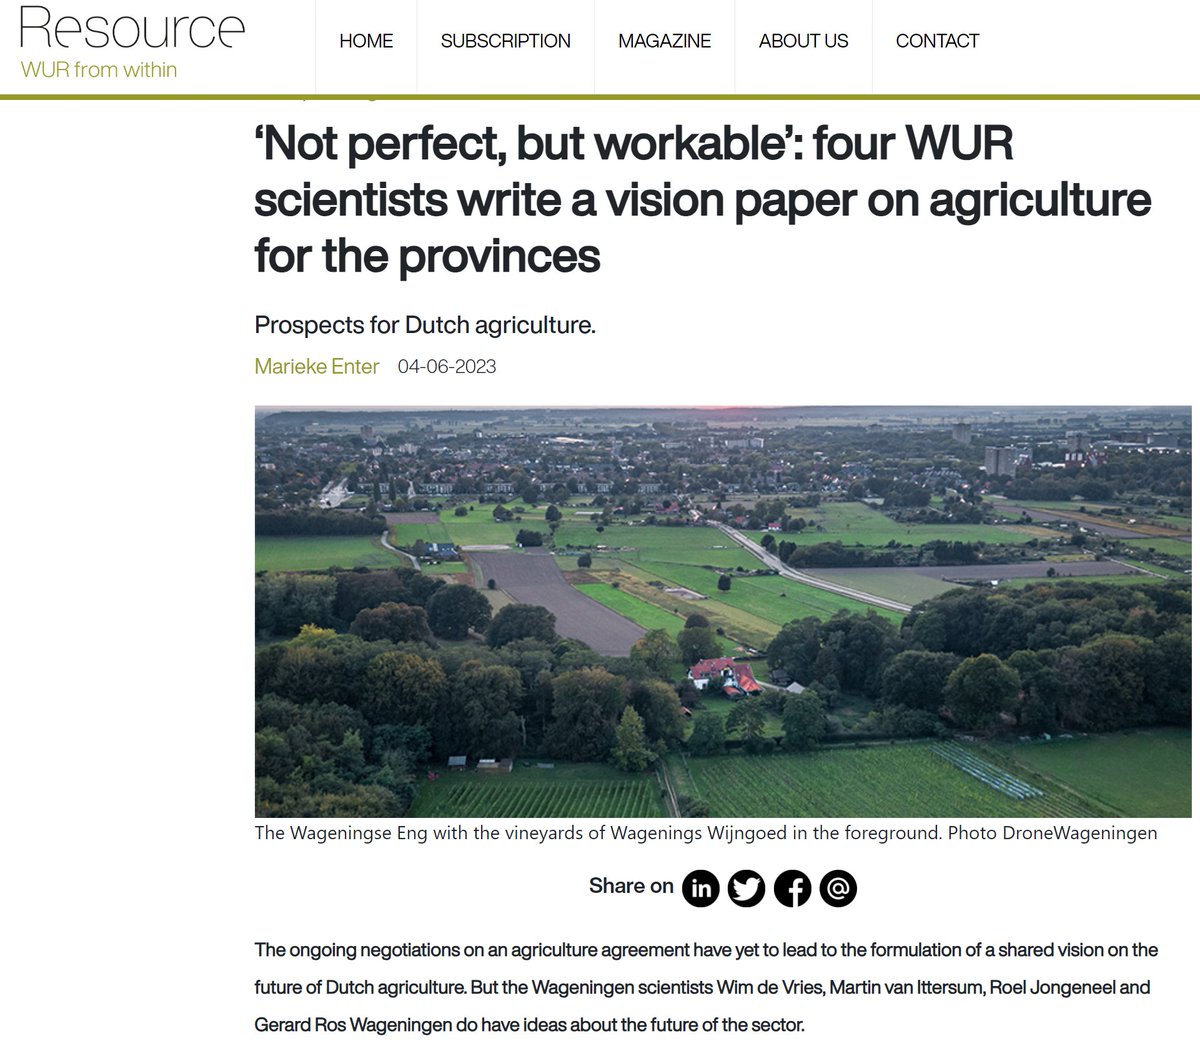 #WUR scientists, among them Roel Jongeneel of bit.ly/2R8QiLE, wrote a #vision paper on #prospects for #DutchAgriculture #Dutch #agriculture #Dutchfarming #EU #Nederland #landbouw #Netherlands #EUfarming #ScientificPerspective #Knowledge4Policy
tinyurl.com/2dt8mkeh